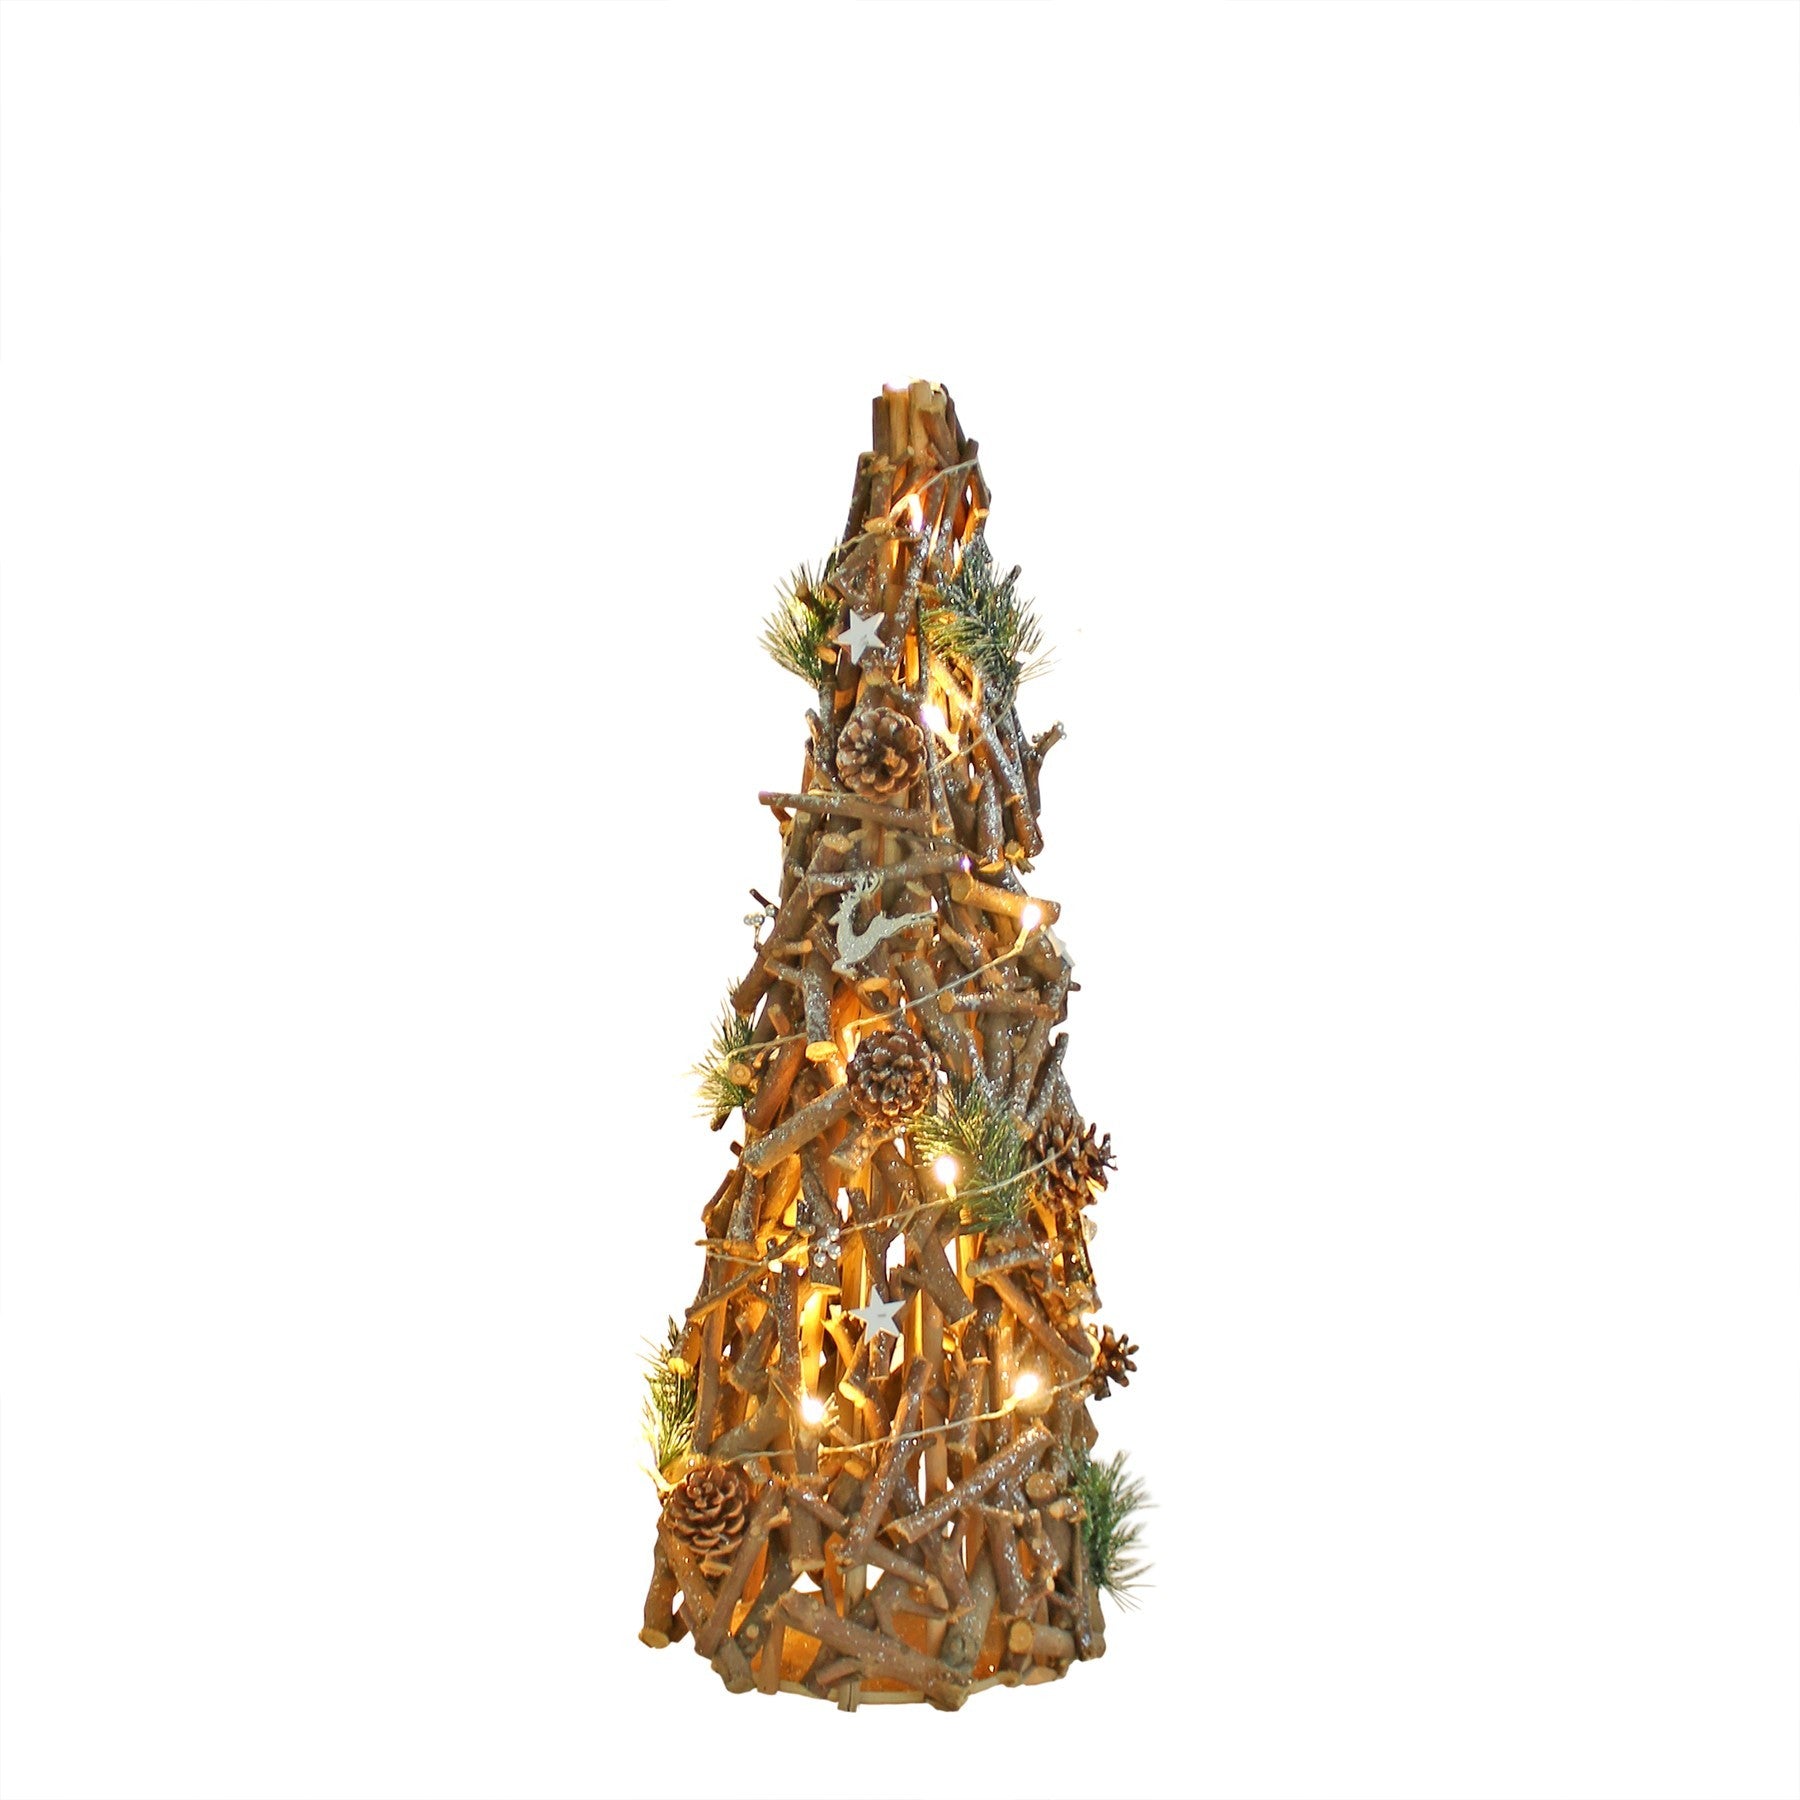 View 80cm Wooden Decorative Christmas Twig Tree with Lights information